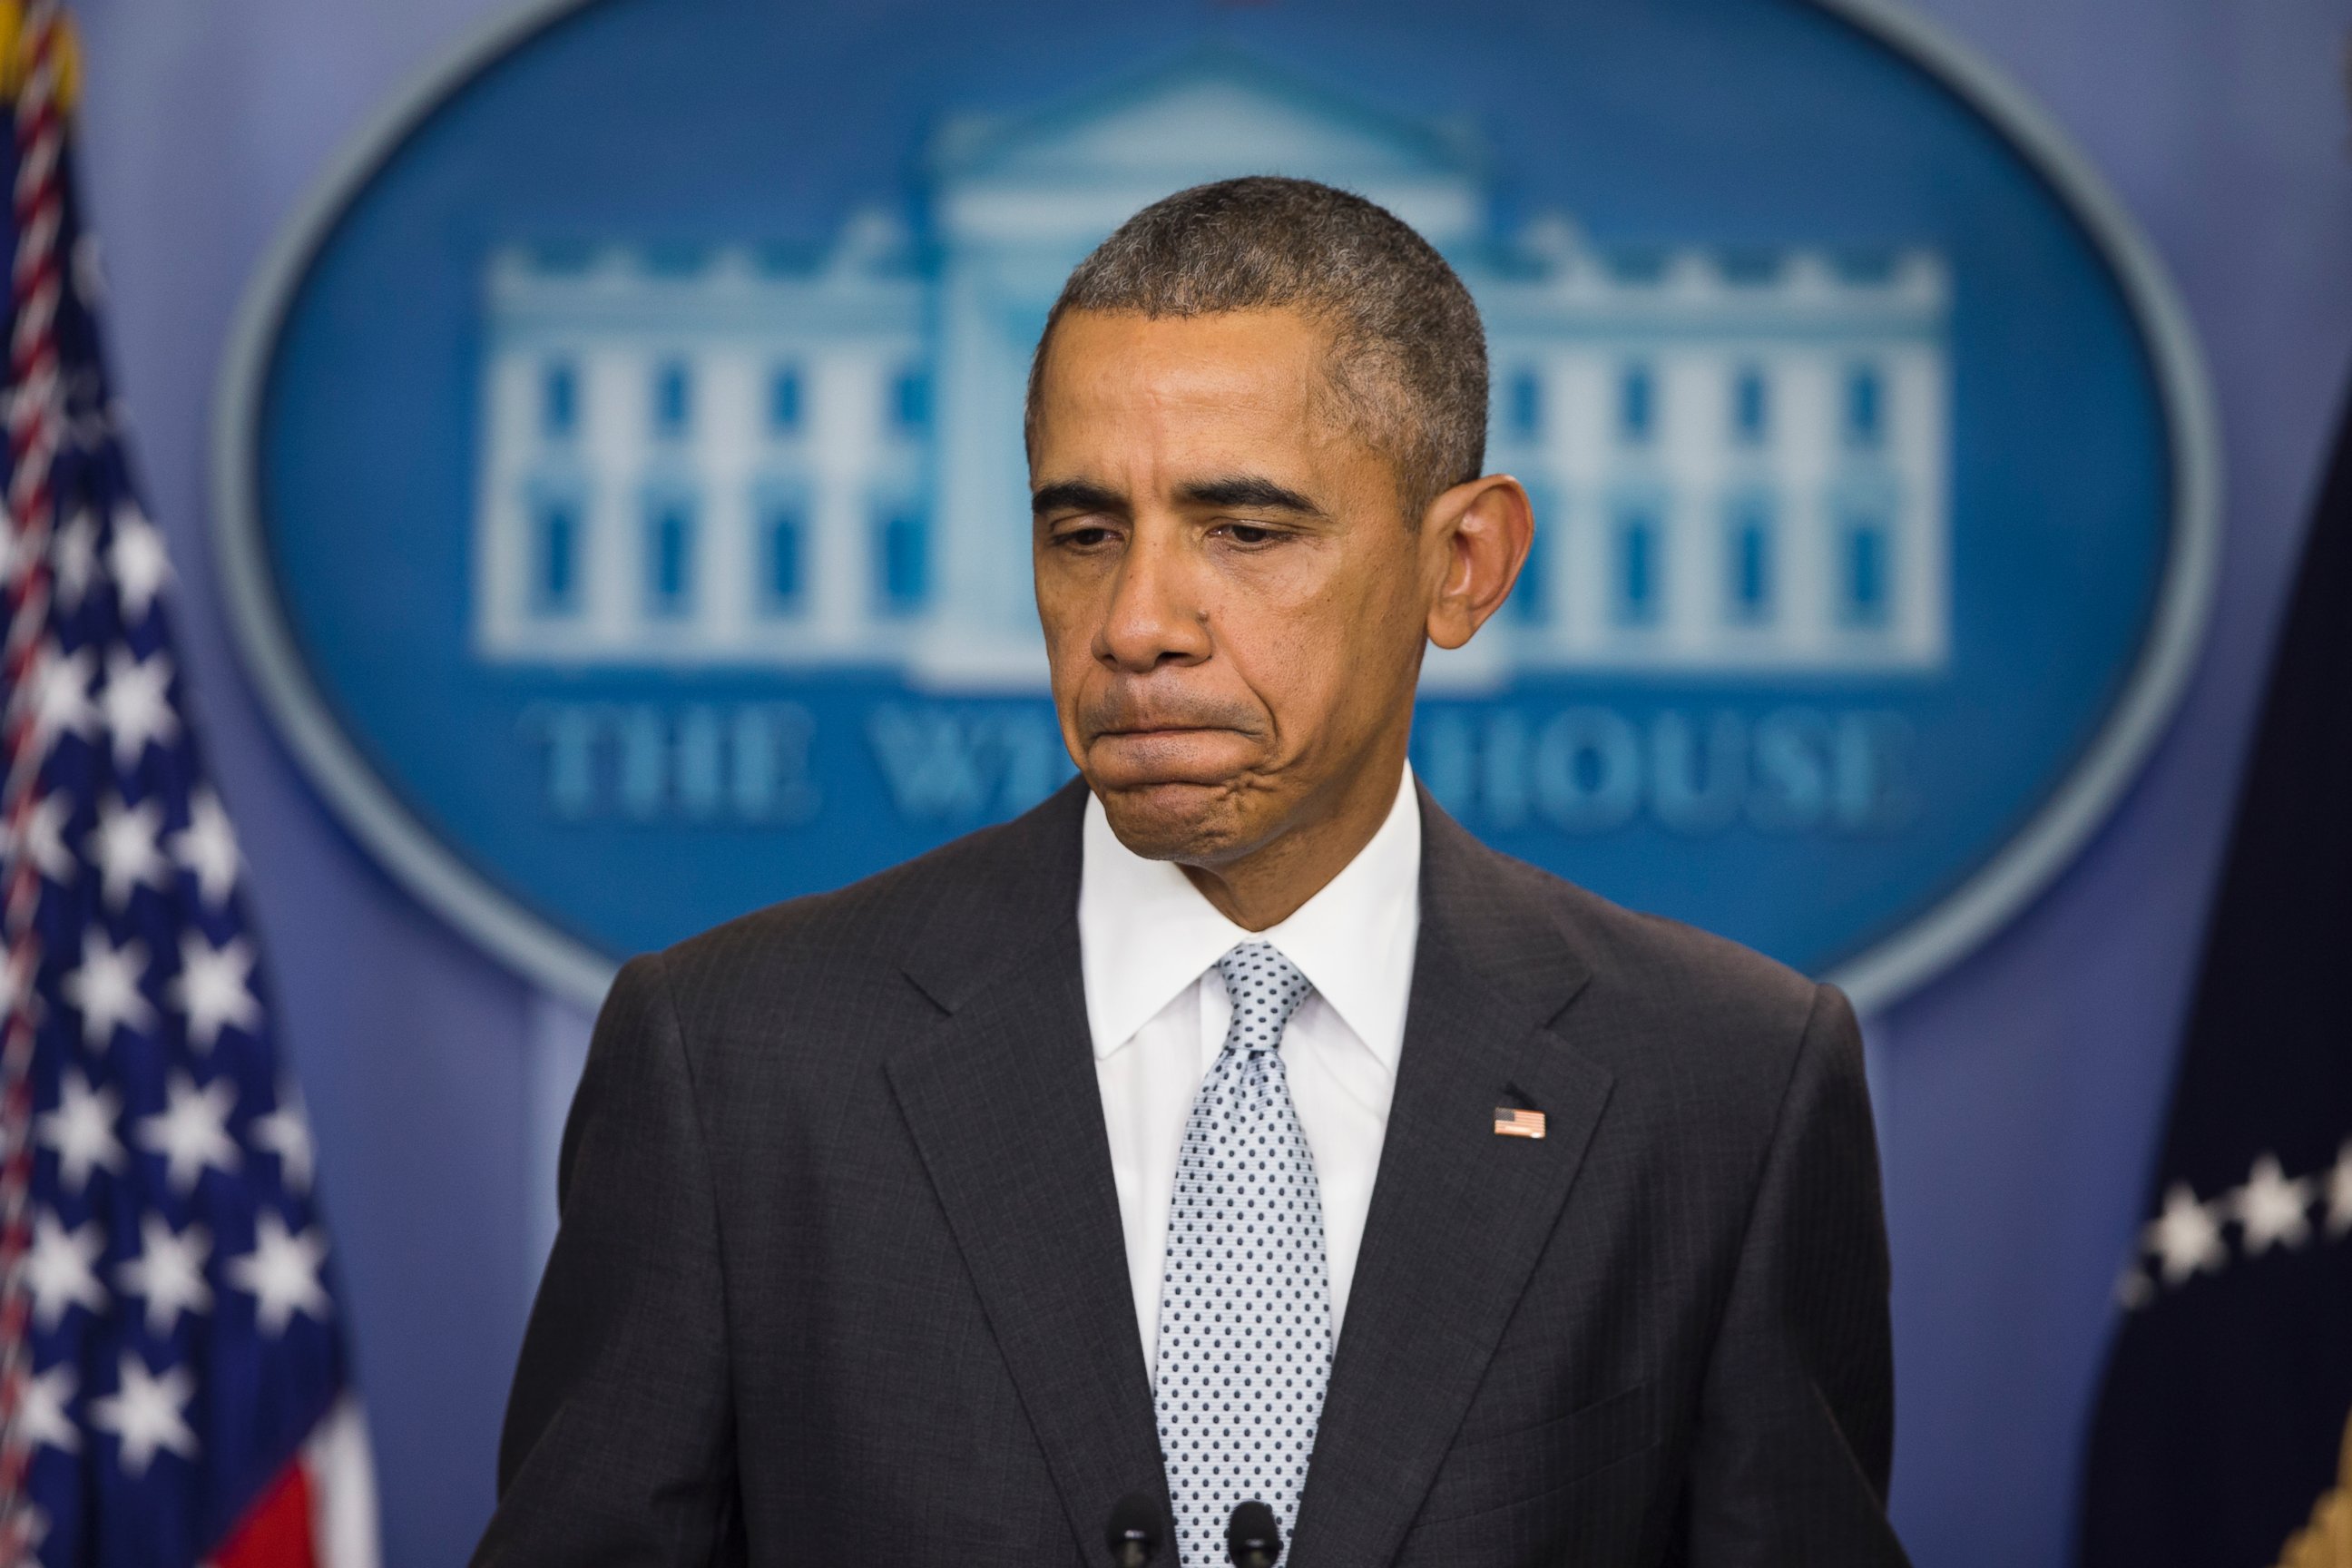 Obama Heartbreaking Paris Terror Is Attack On All of Humanity